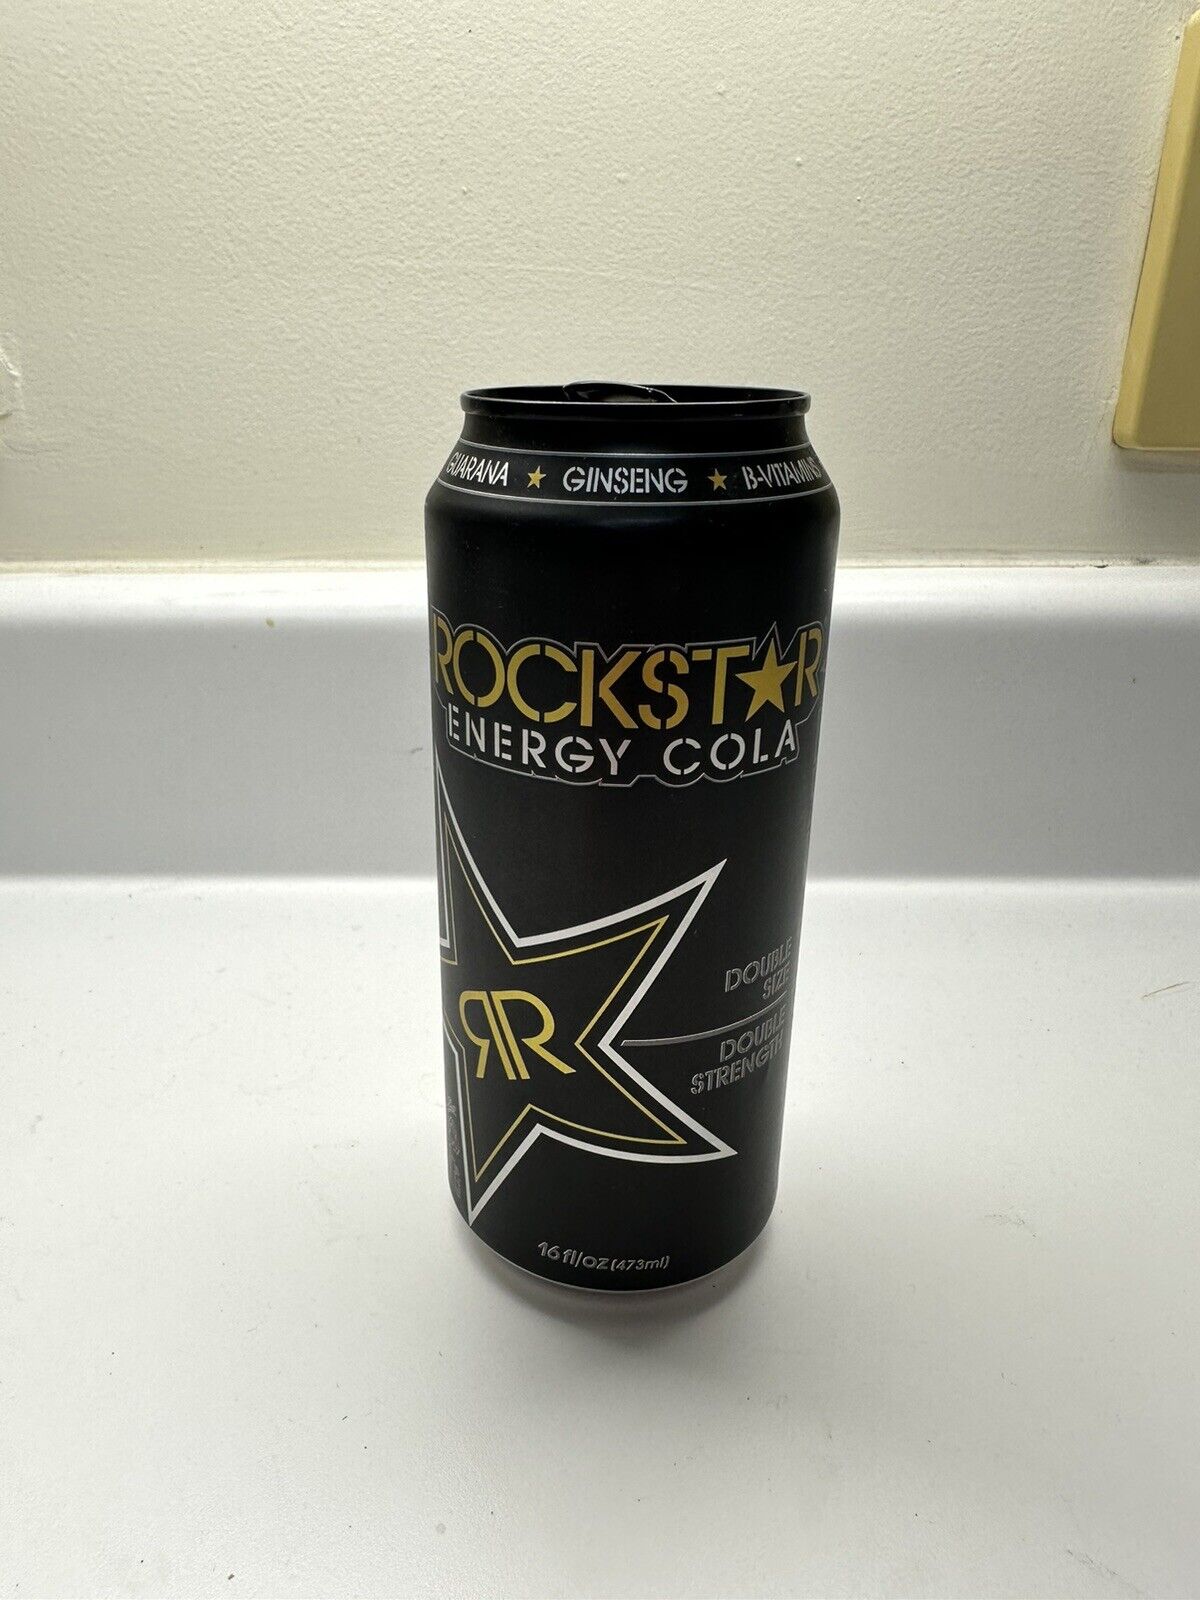 Rockstar Energy Cola Empty Can Rare Limited Edition 2009 